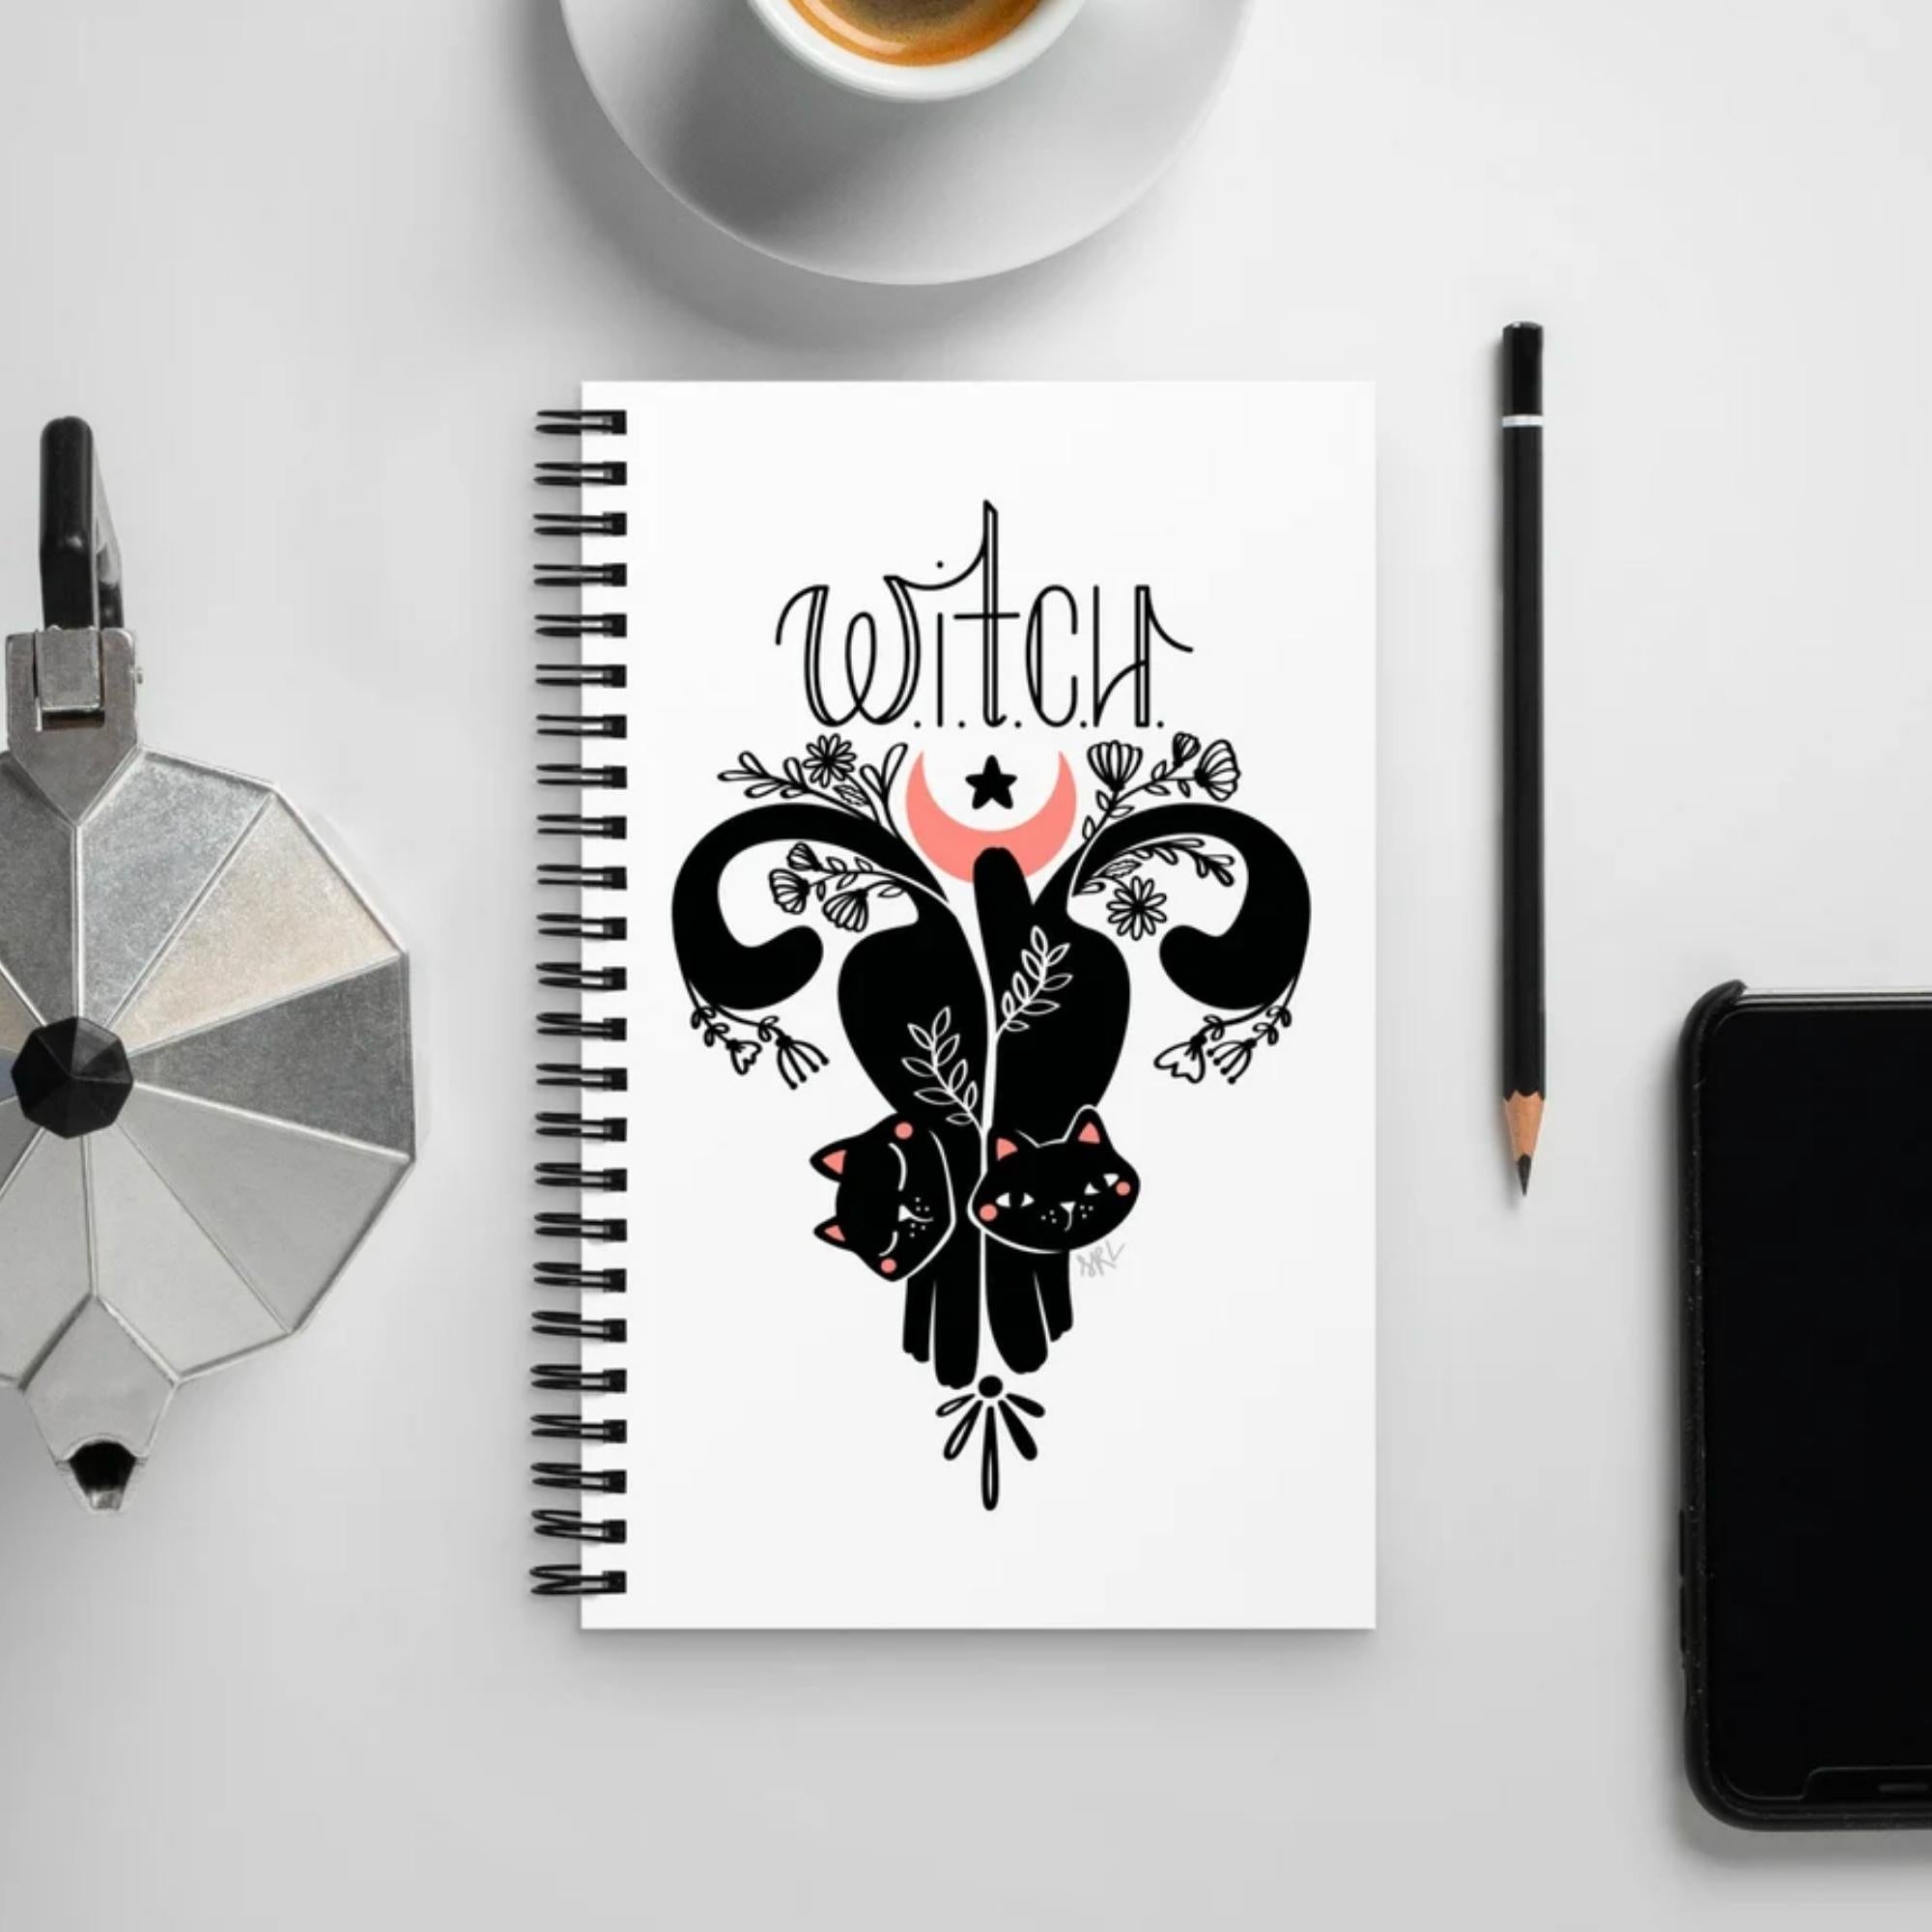 W.I.T.C.H Spiral Notebook | Woman In Total Control of Herself | 5.5" x 8.5"